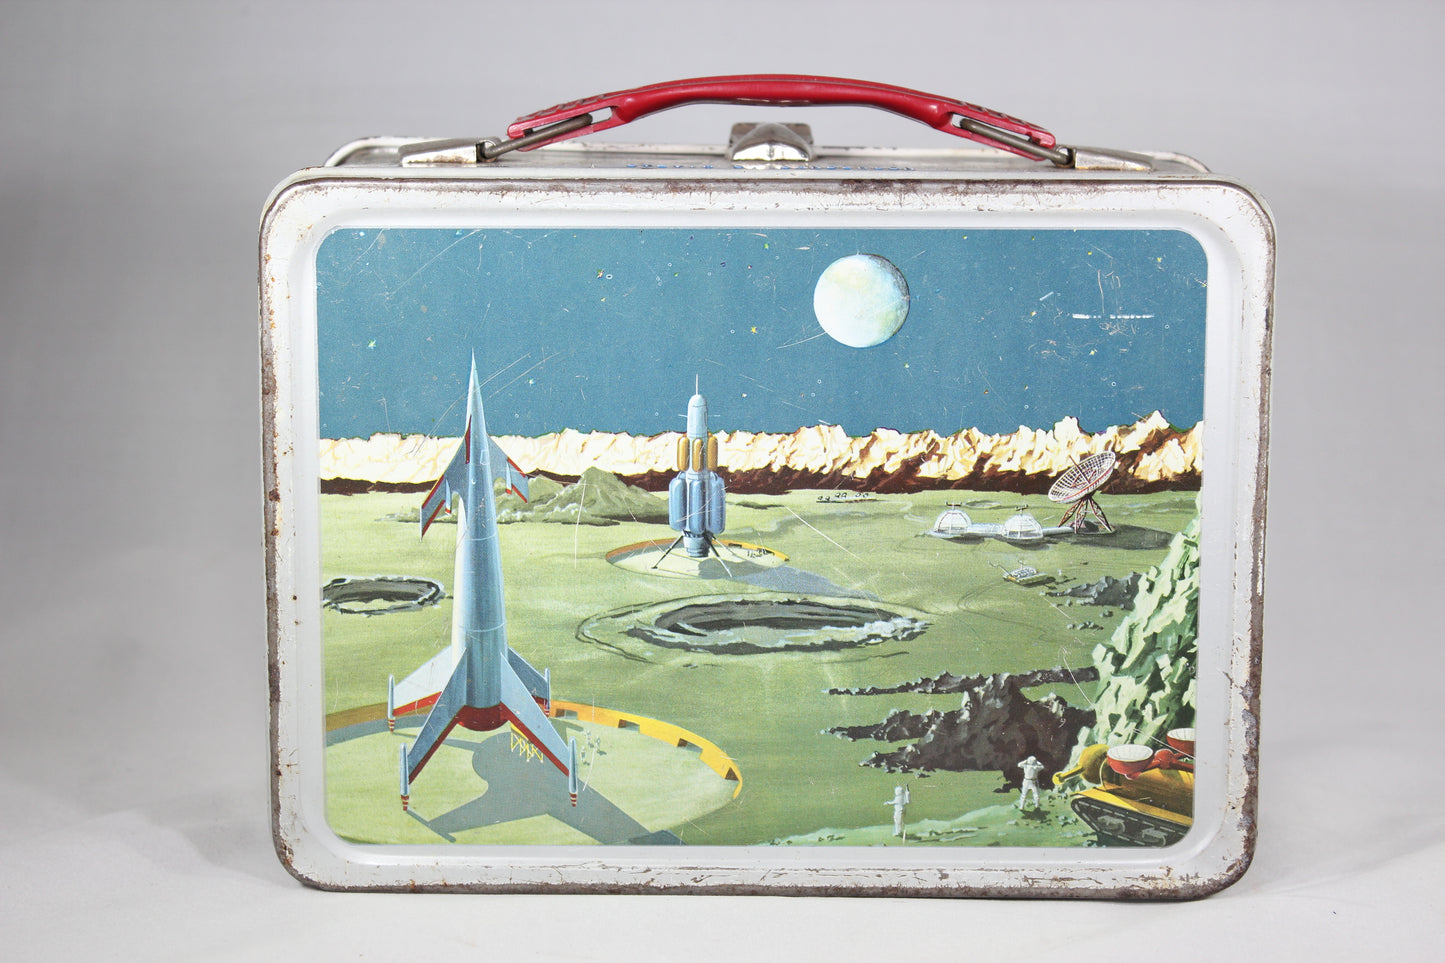 Retro Futuristic Outer Space Themed Thermos Brand Metal Lunchbox, 1950s